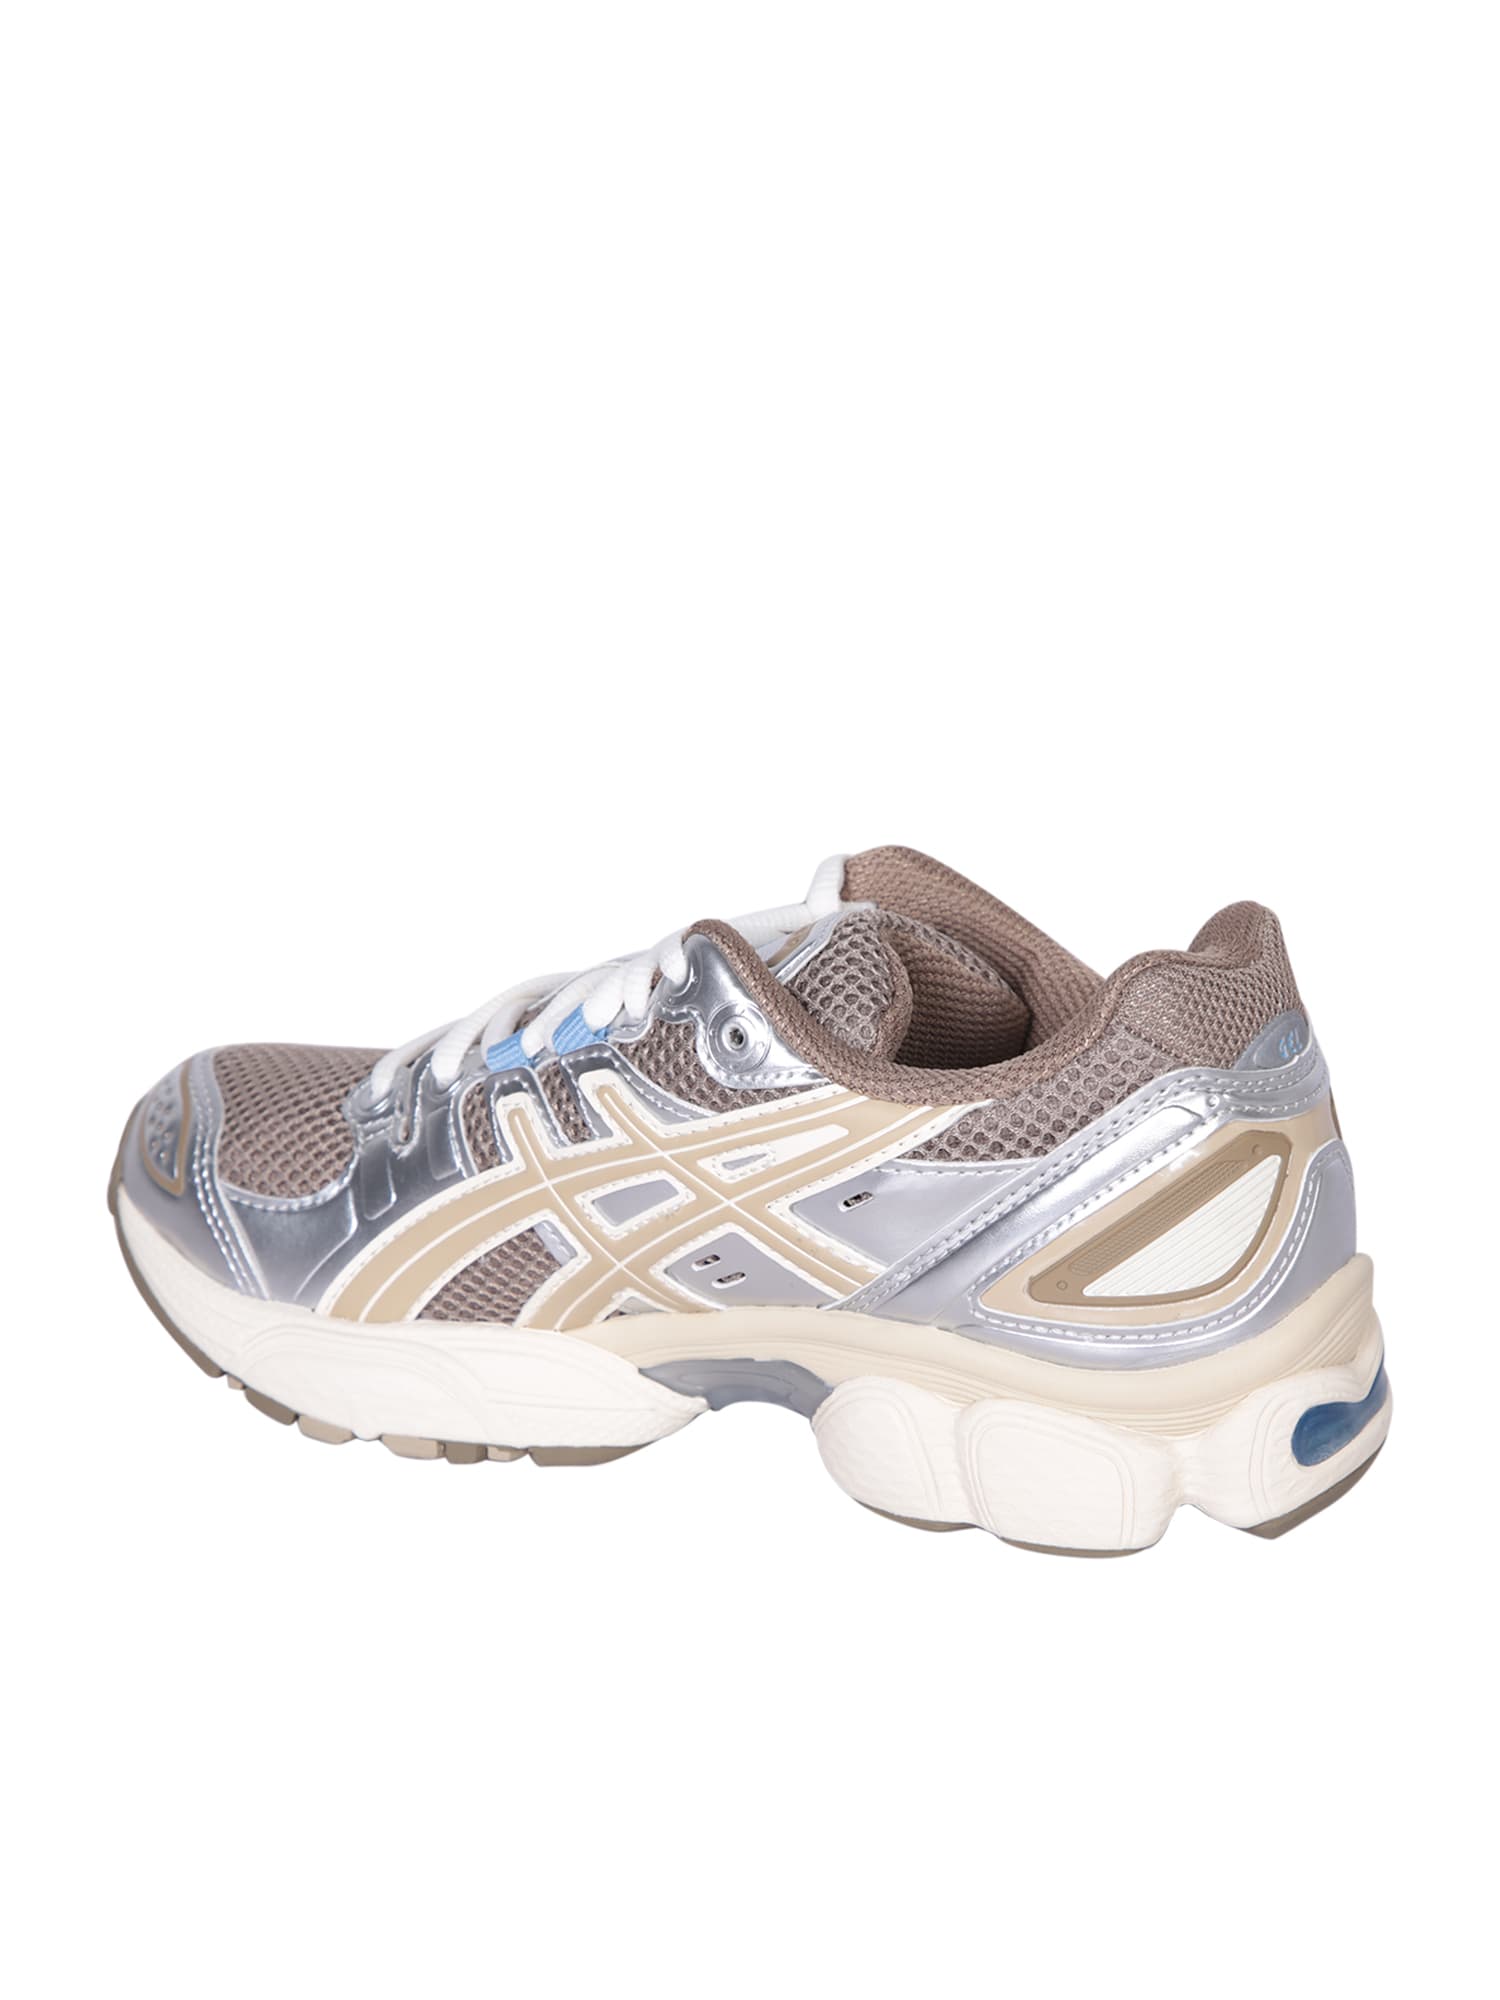 Shop Asics Nimbus 9 Sneakers In Beige And Light Blue